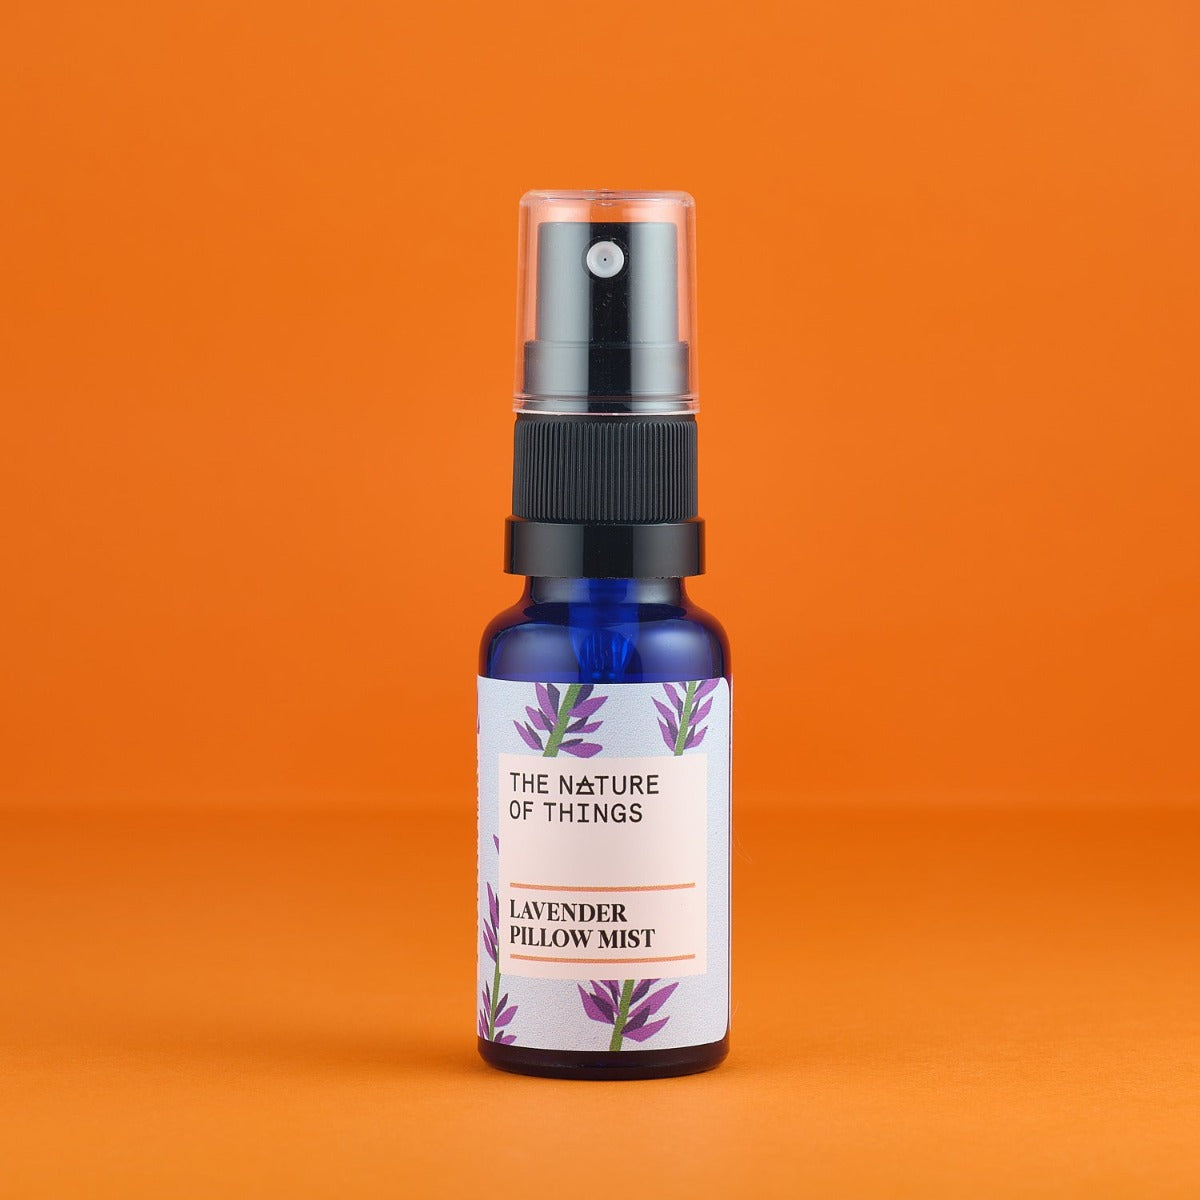 Lavender Pillow Mist from The Nature of Things